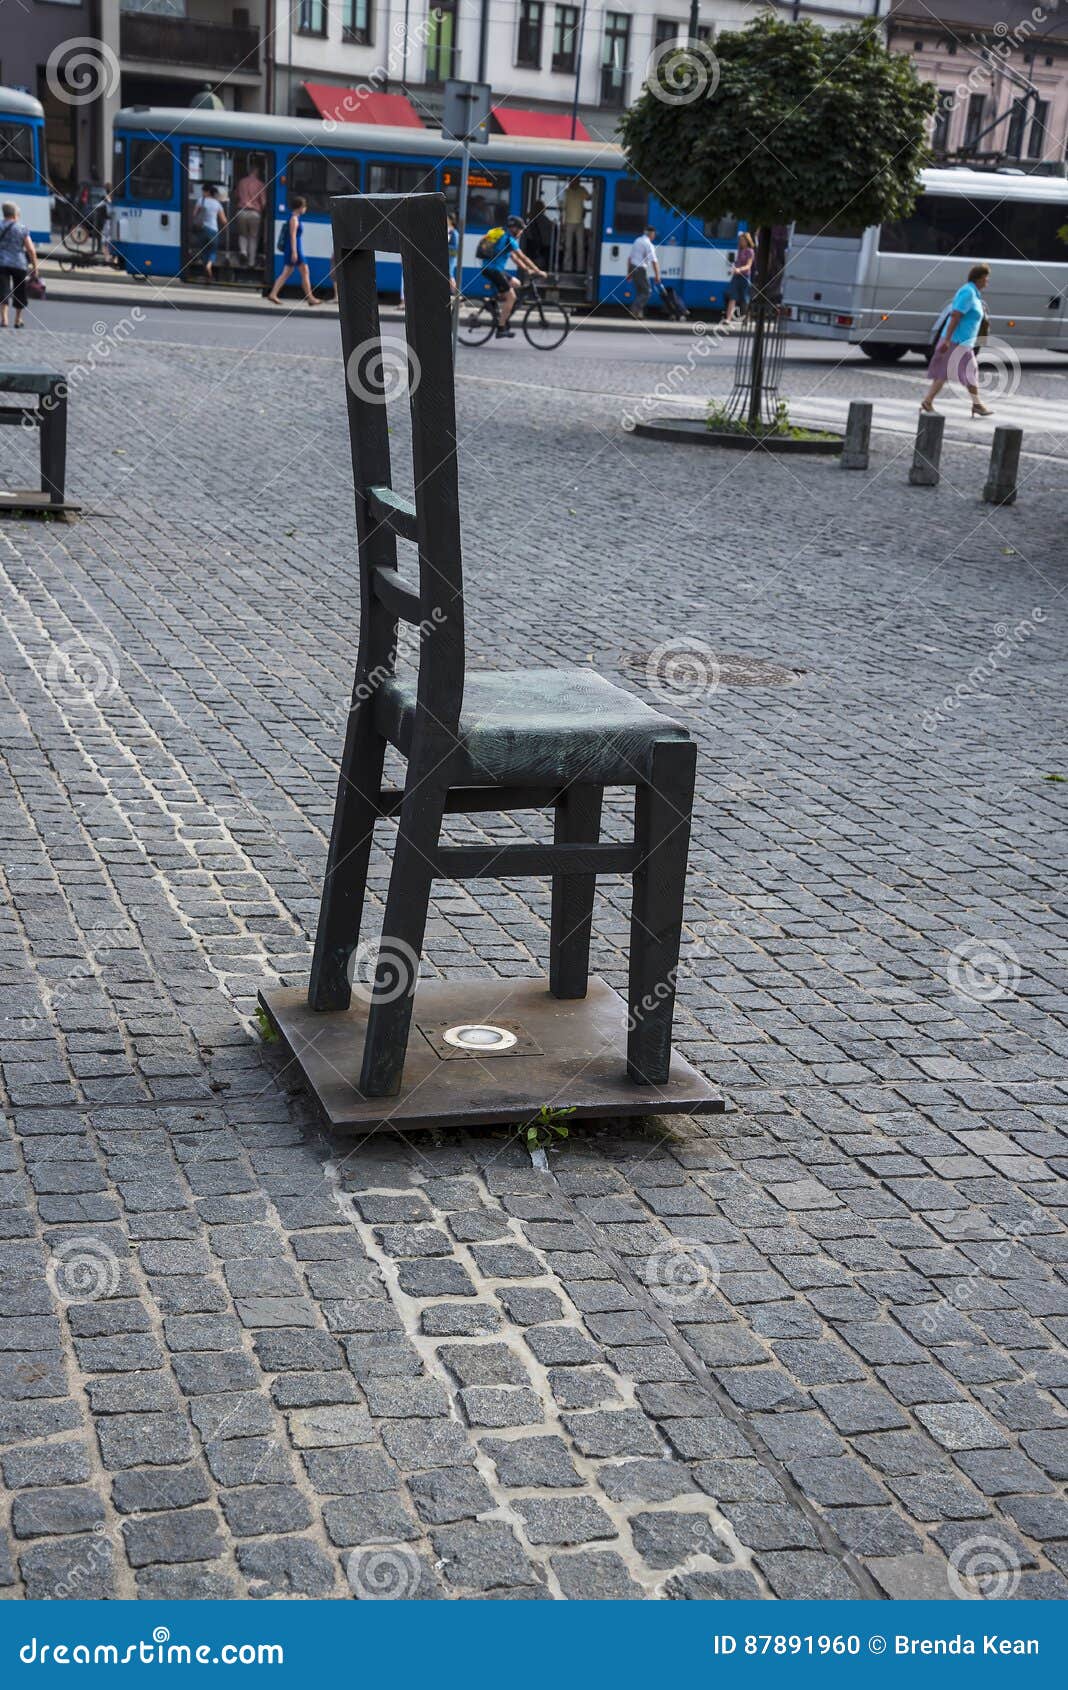 https://thumbs.dreamstime.com/z/square-empty-chairs-krakow-poland-memorial-to-people-who-died-german-nazi-extermination-camps-87891960.jpg